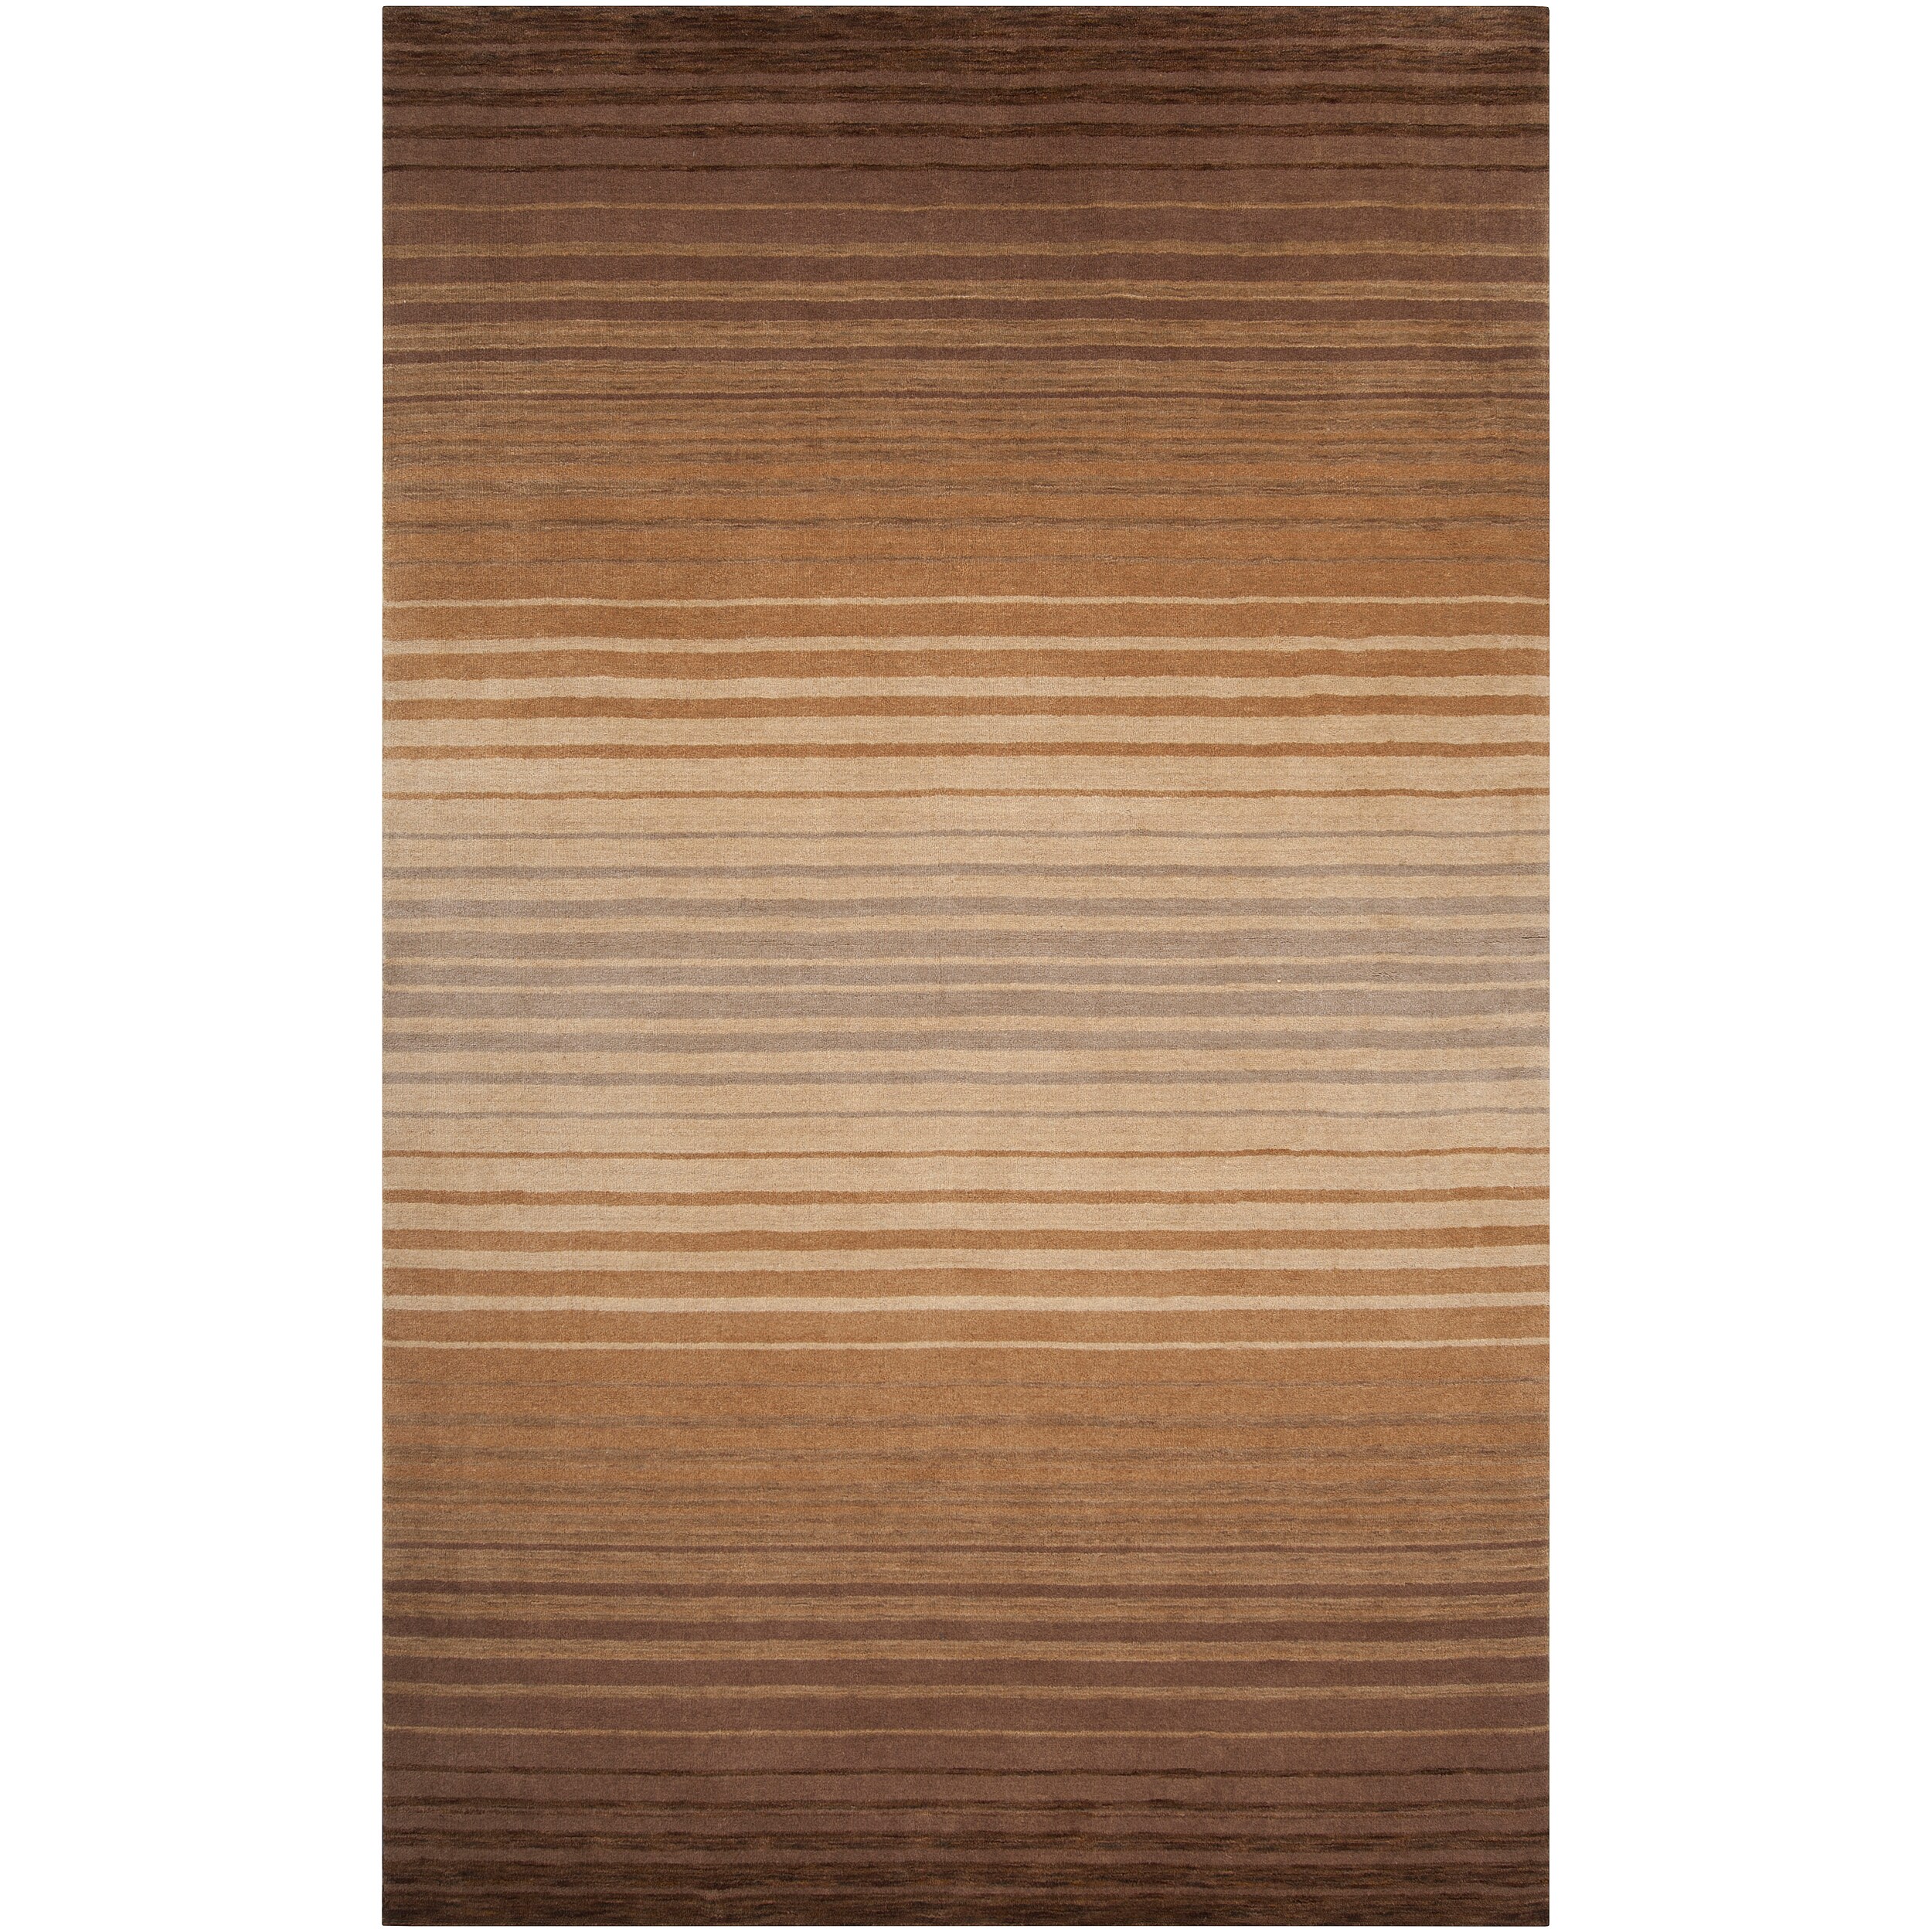 Hand crafted Brown/beige Ombre Indus Valley Wool Rug (5 X 8)